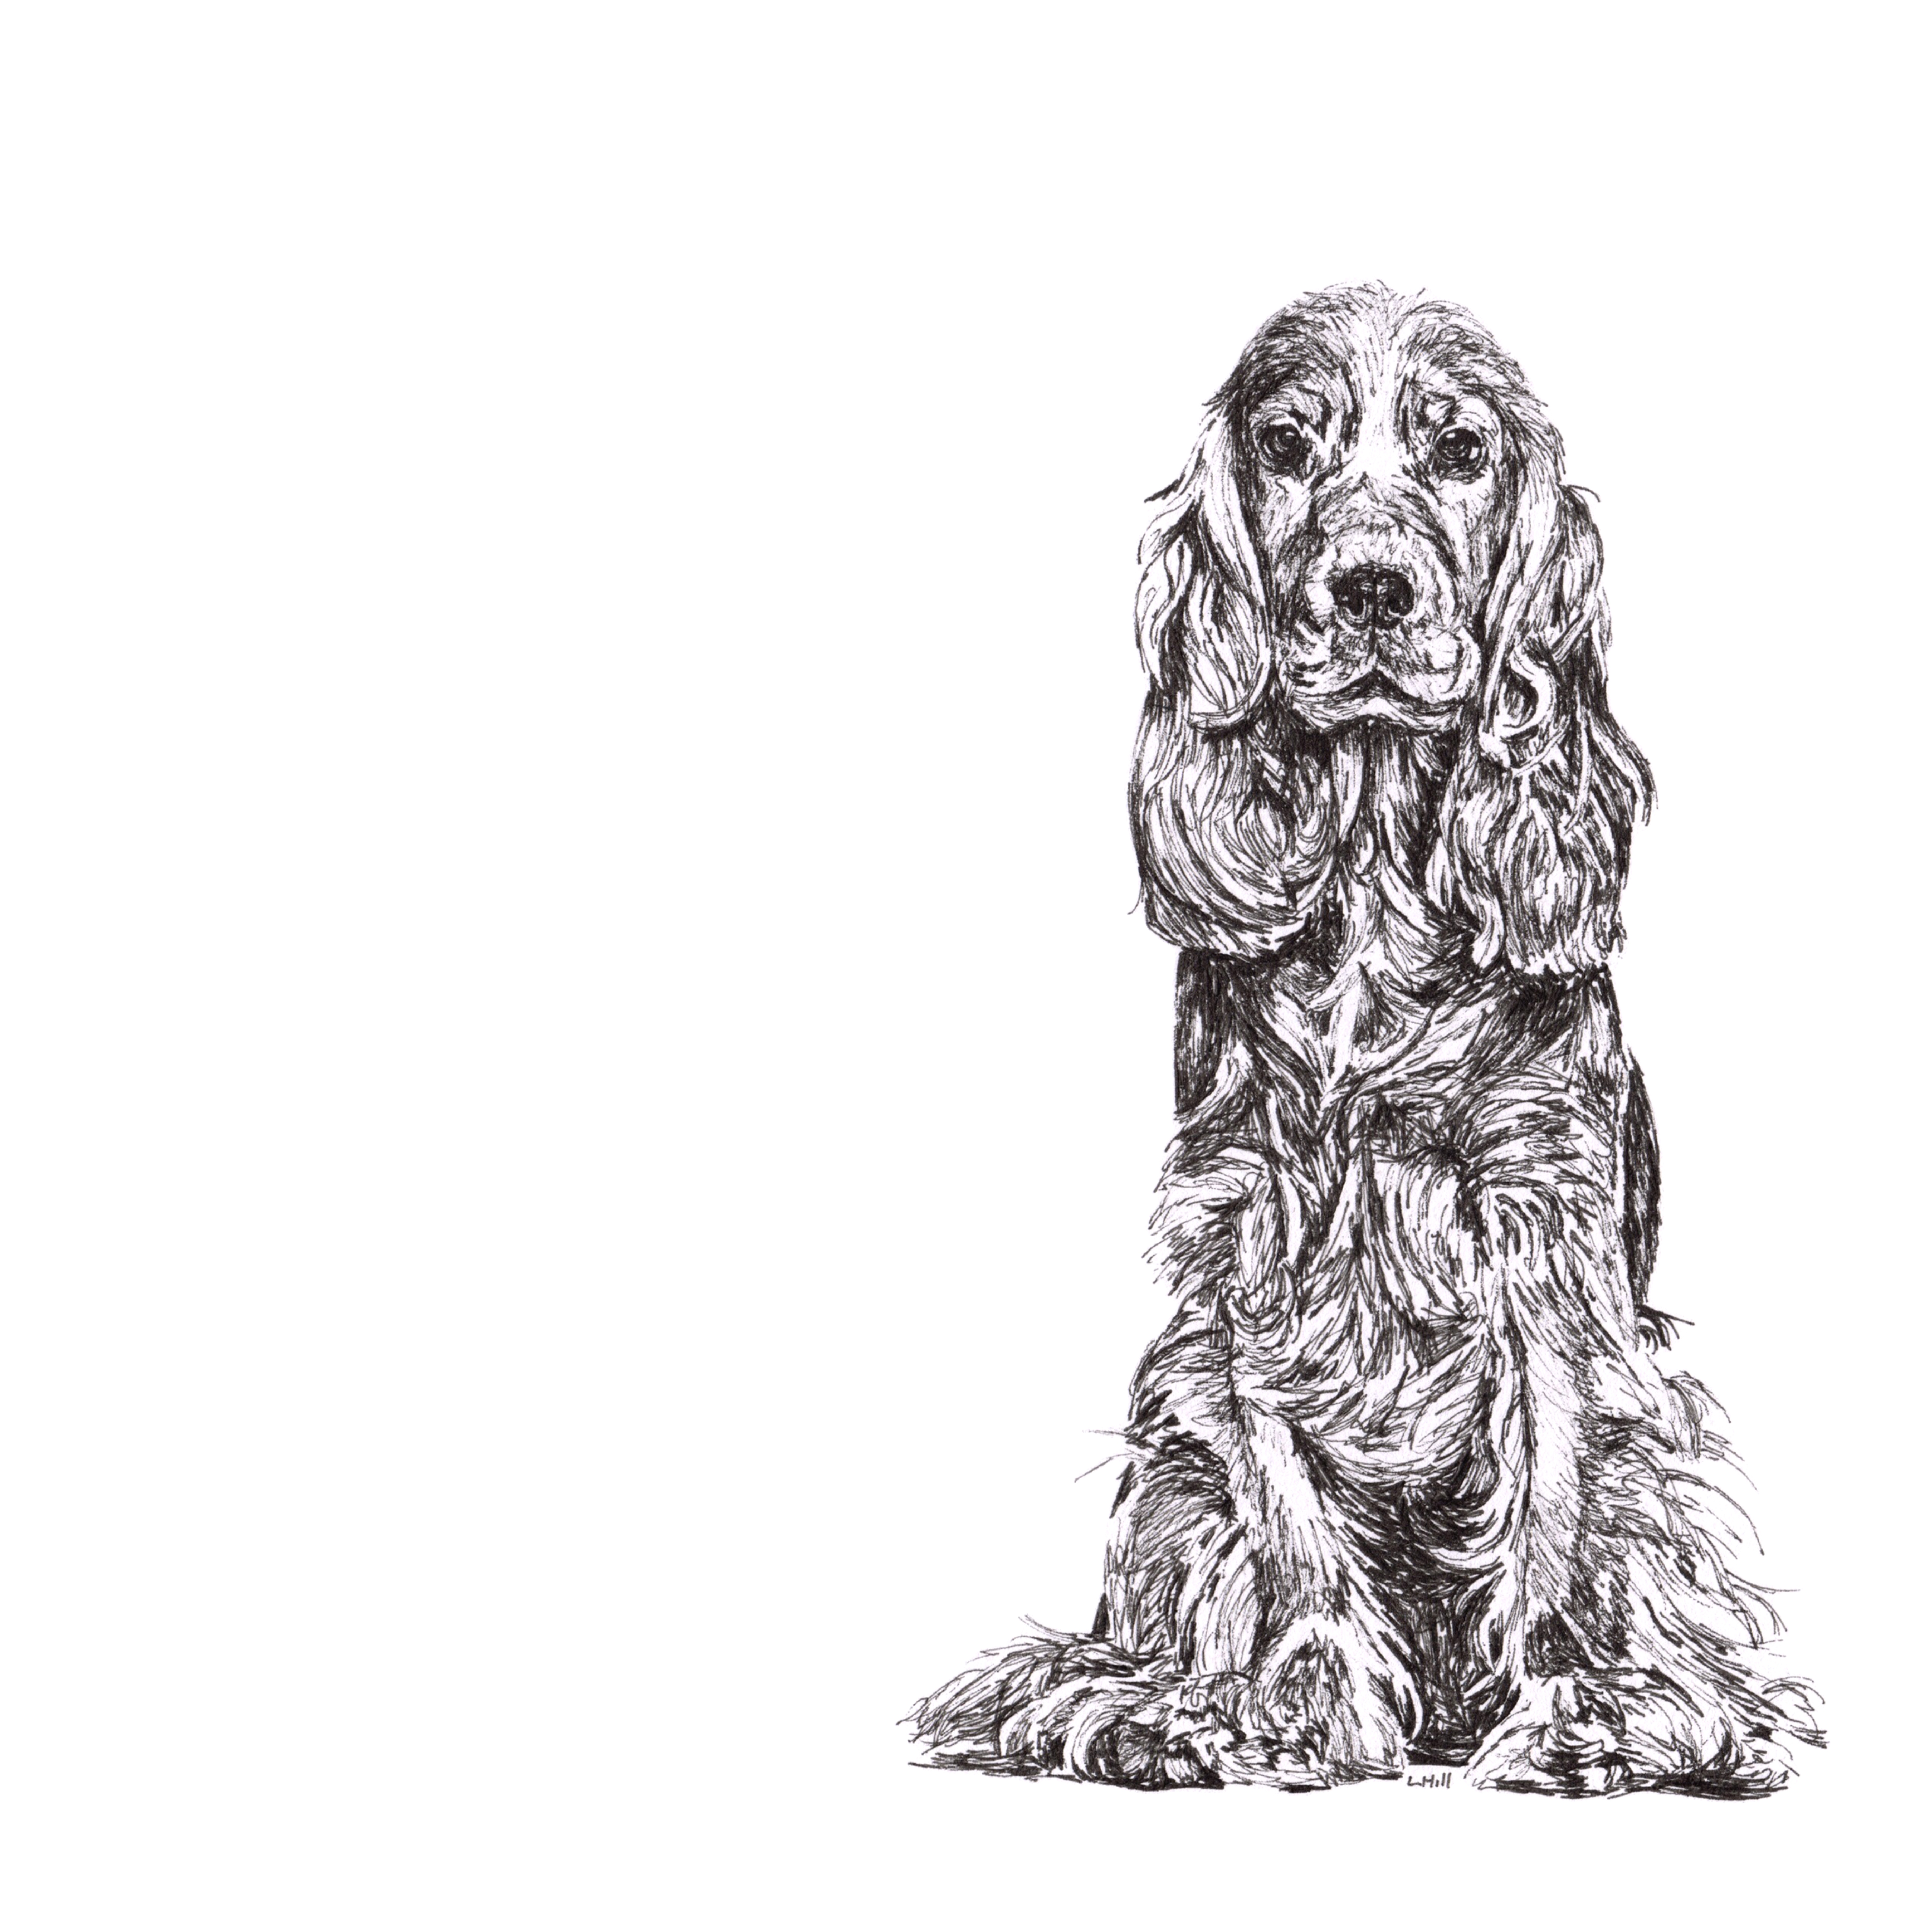 Cocker Spaniel pen and ink illustration by Louisa Hill